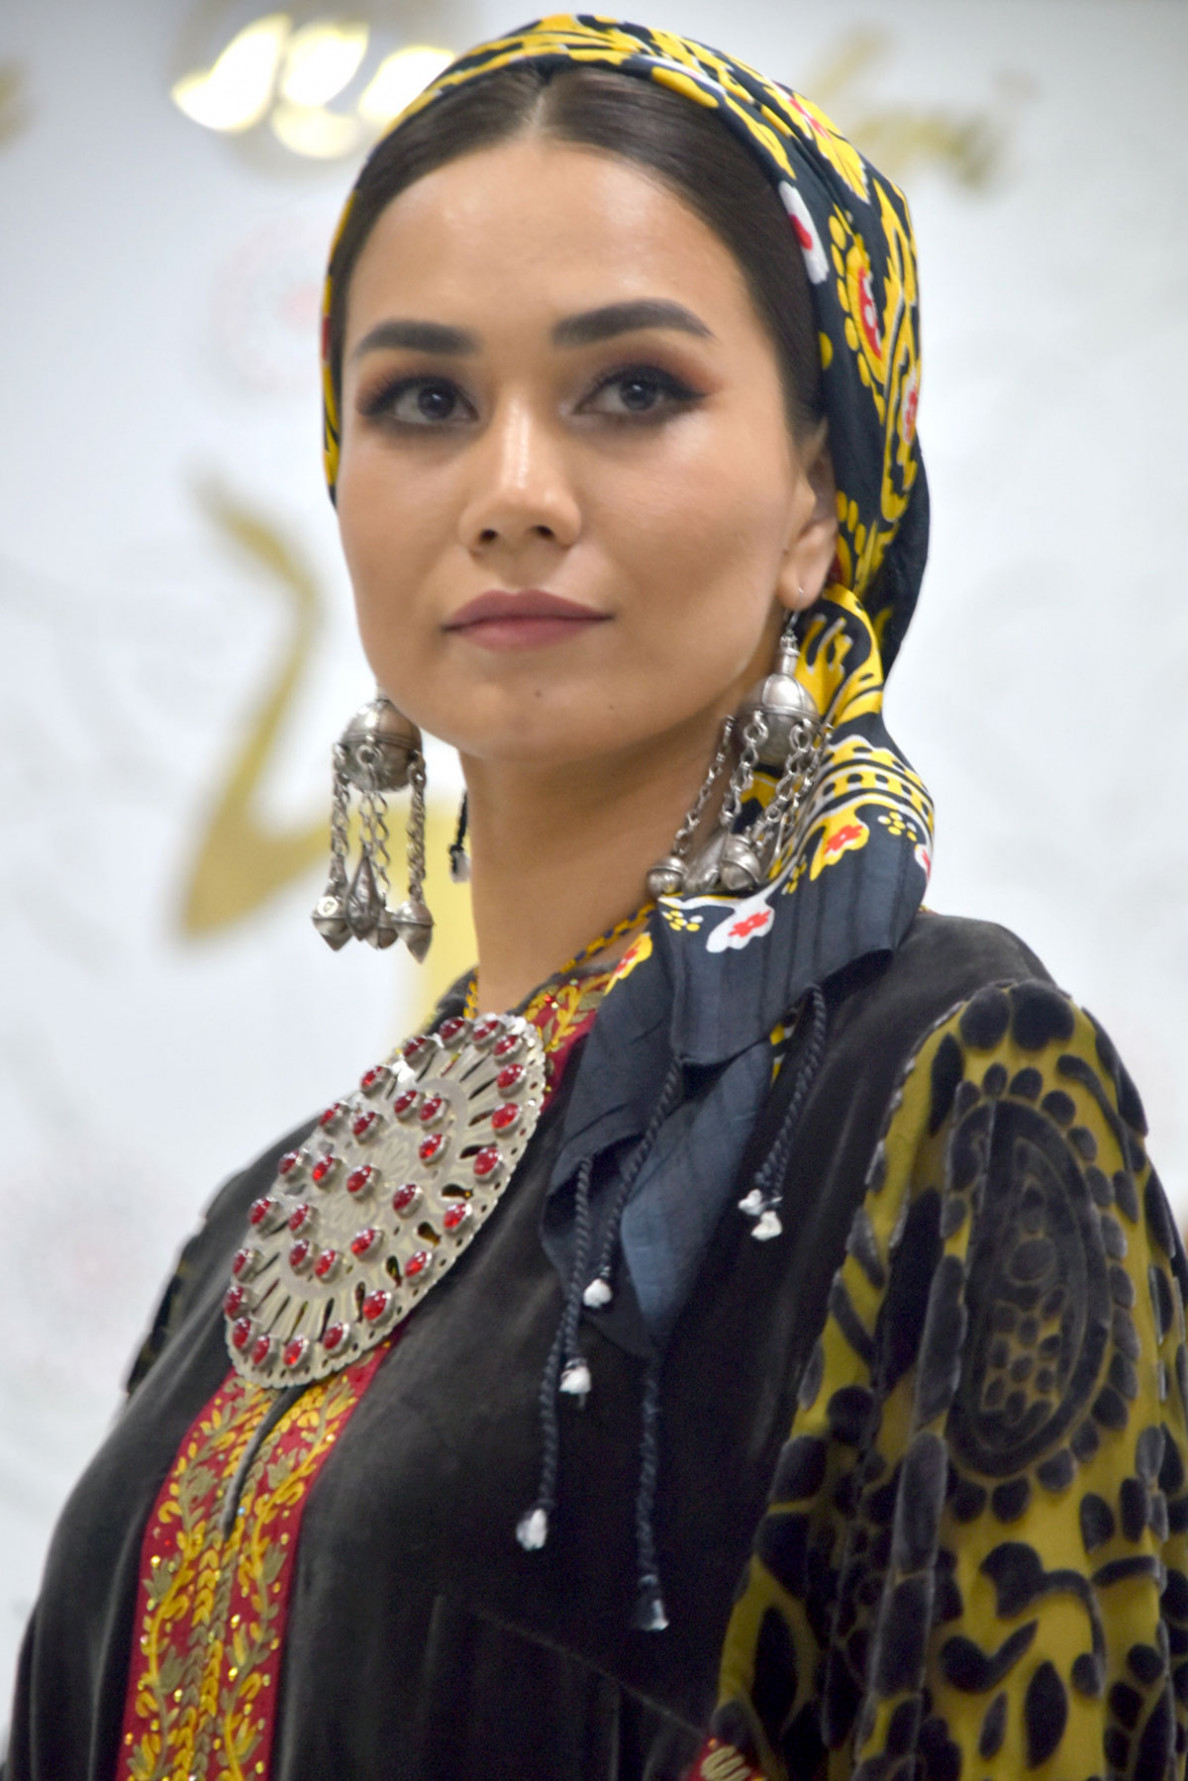 An Ethno-Style Fashion Show in the Heart of the Turkmen Capital